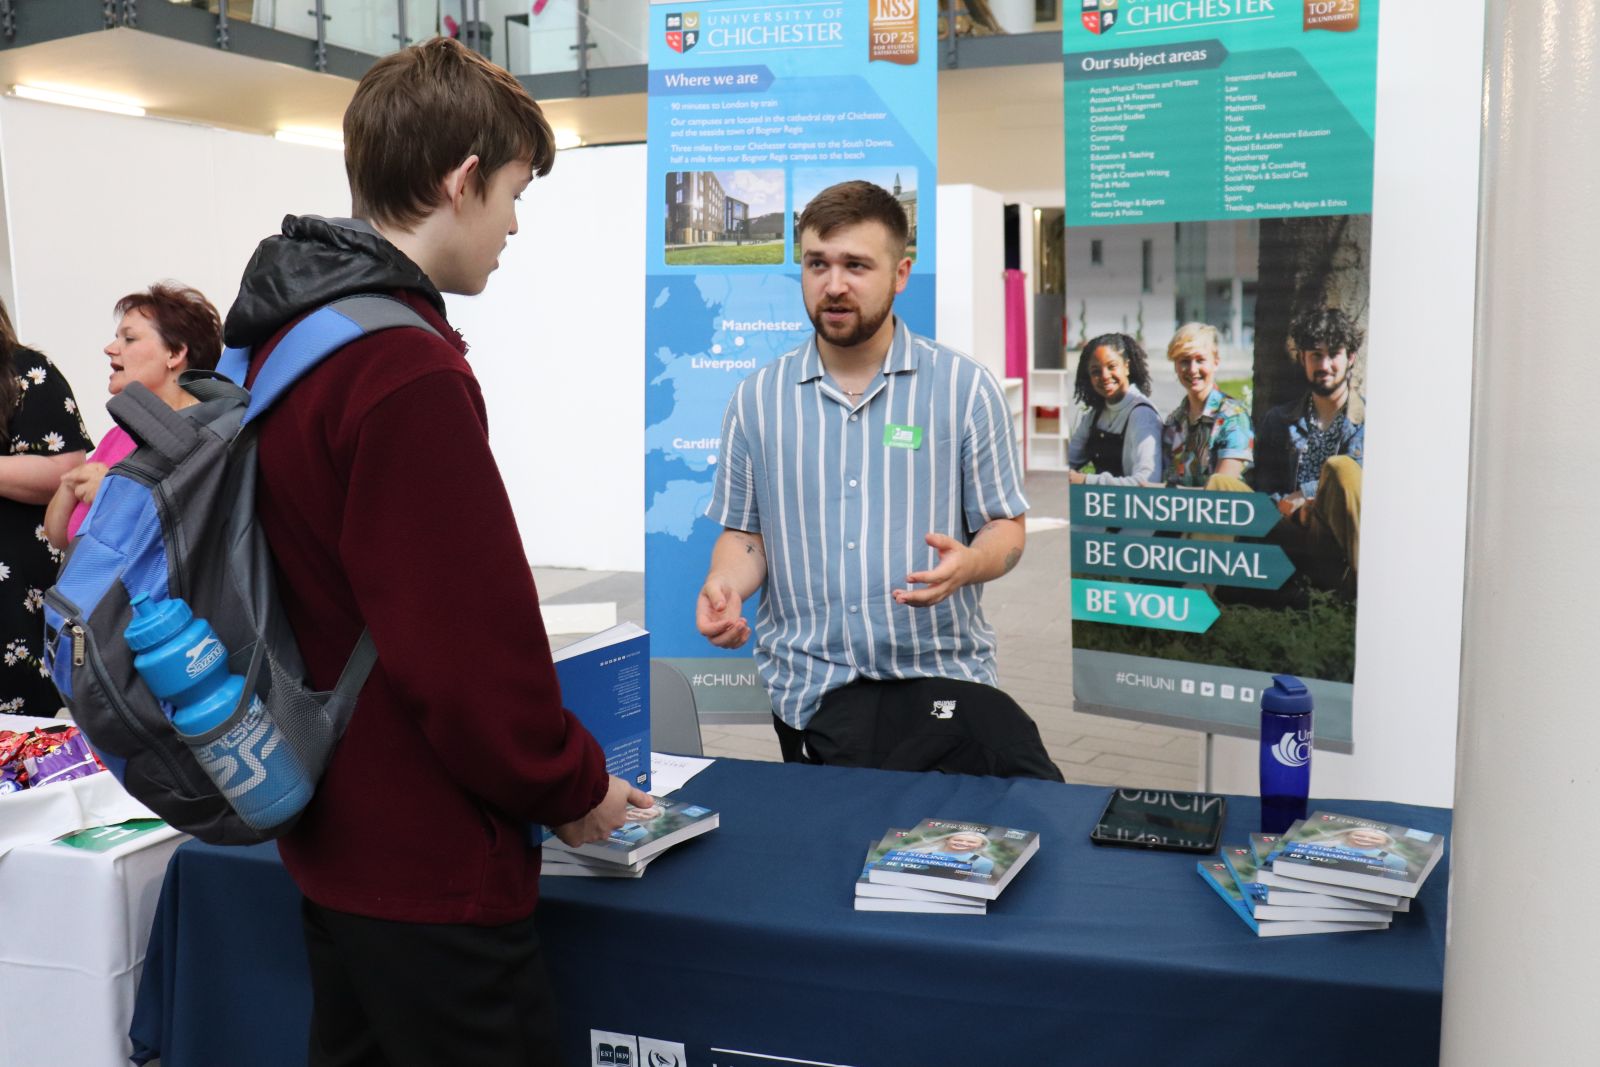 Student finding out about Chichester University